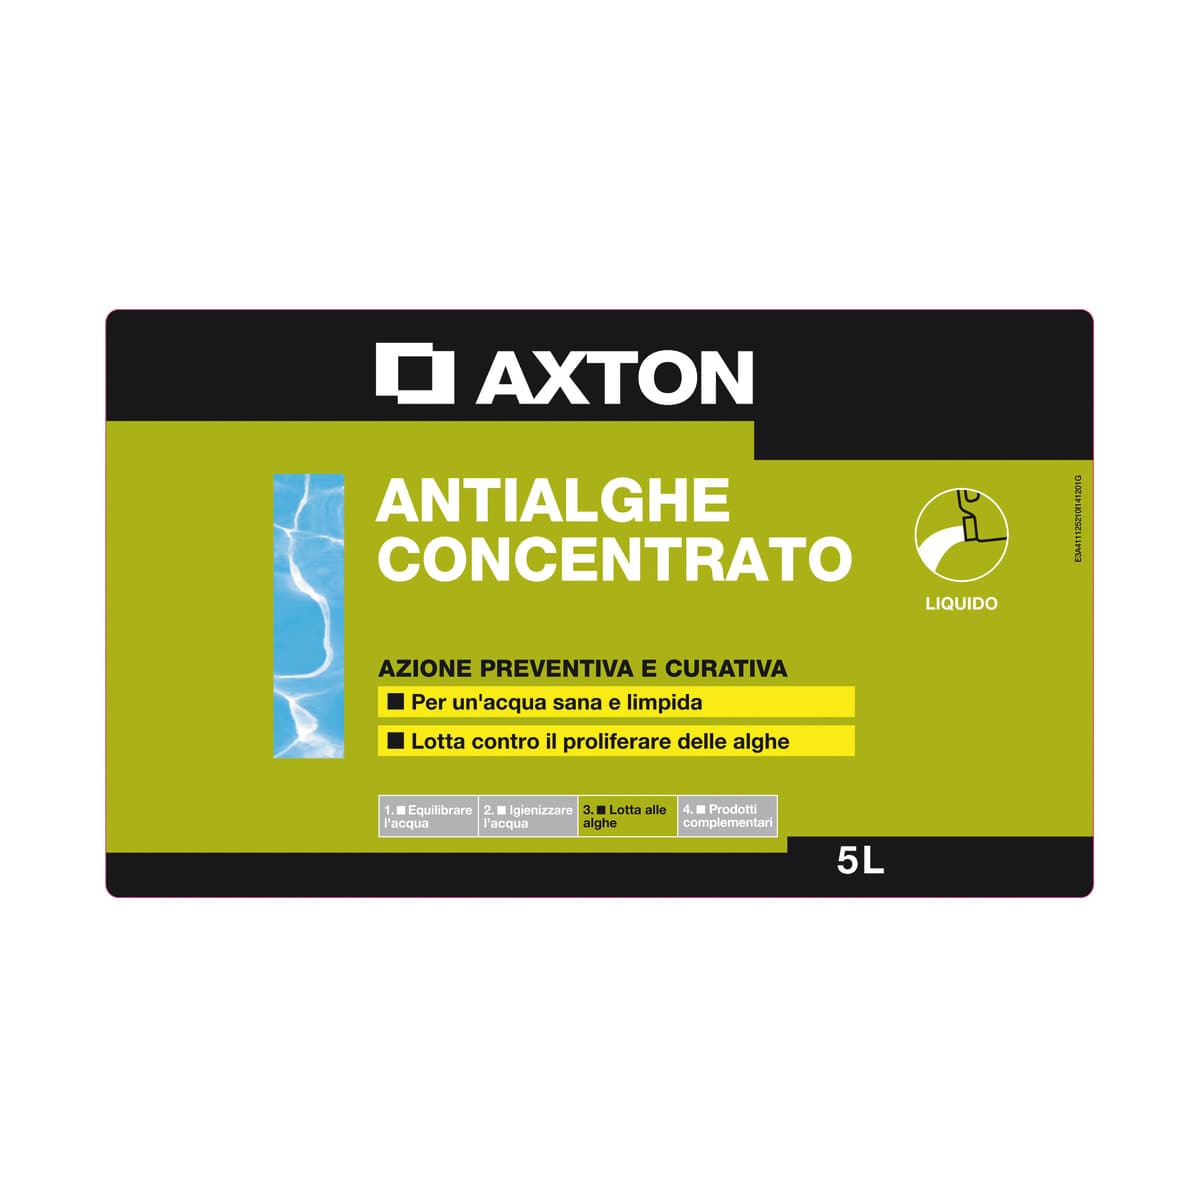 CONCENTRATED ANTIALGAE BOX 5LT AXTON - best price from Maltashopper.com BR500011610